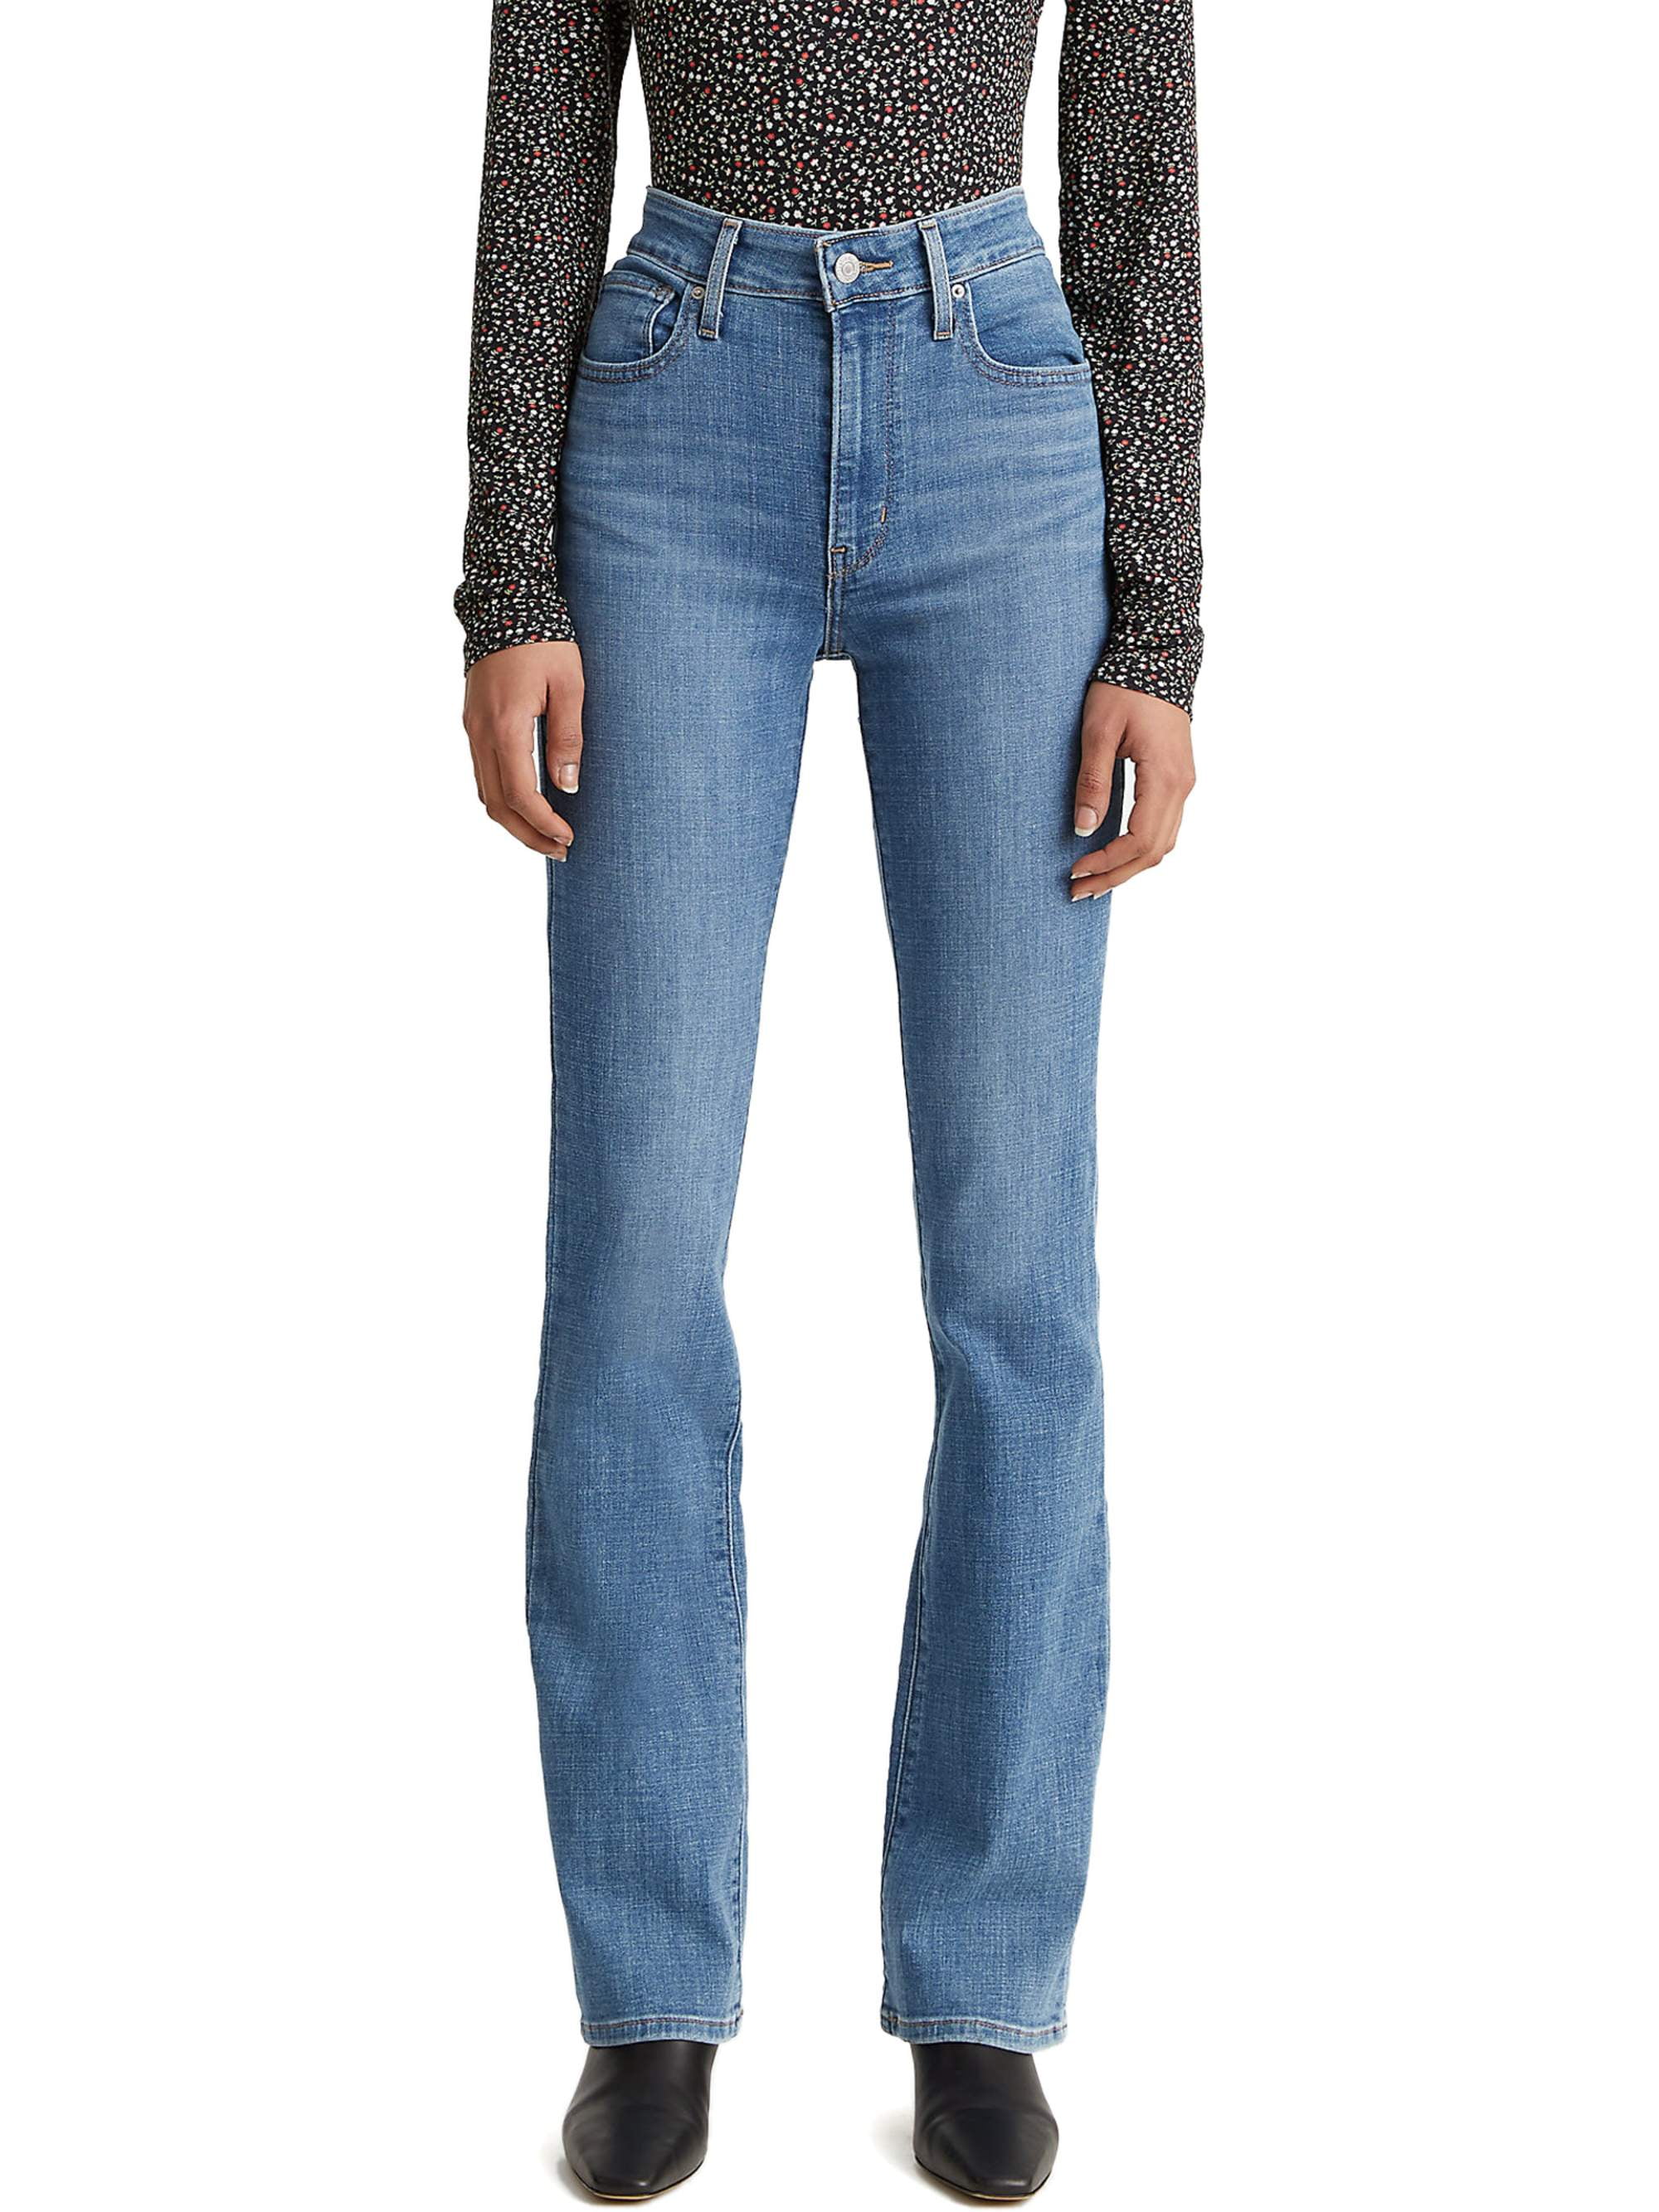 Buy > levis 725 high rise bootcut jeans > in stock